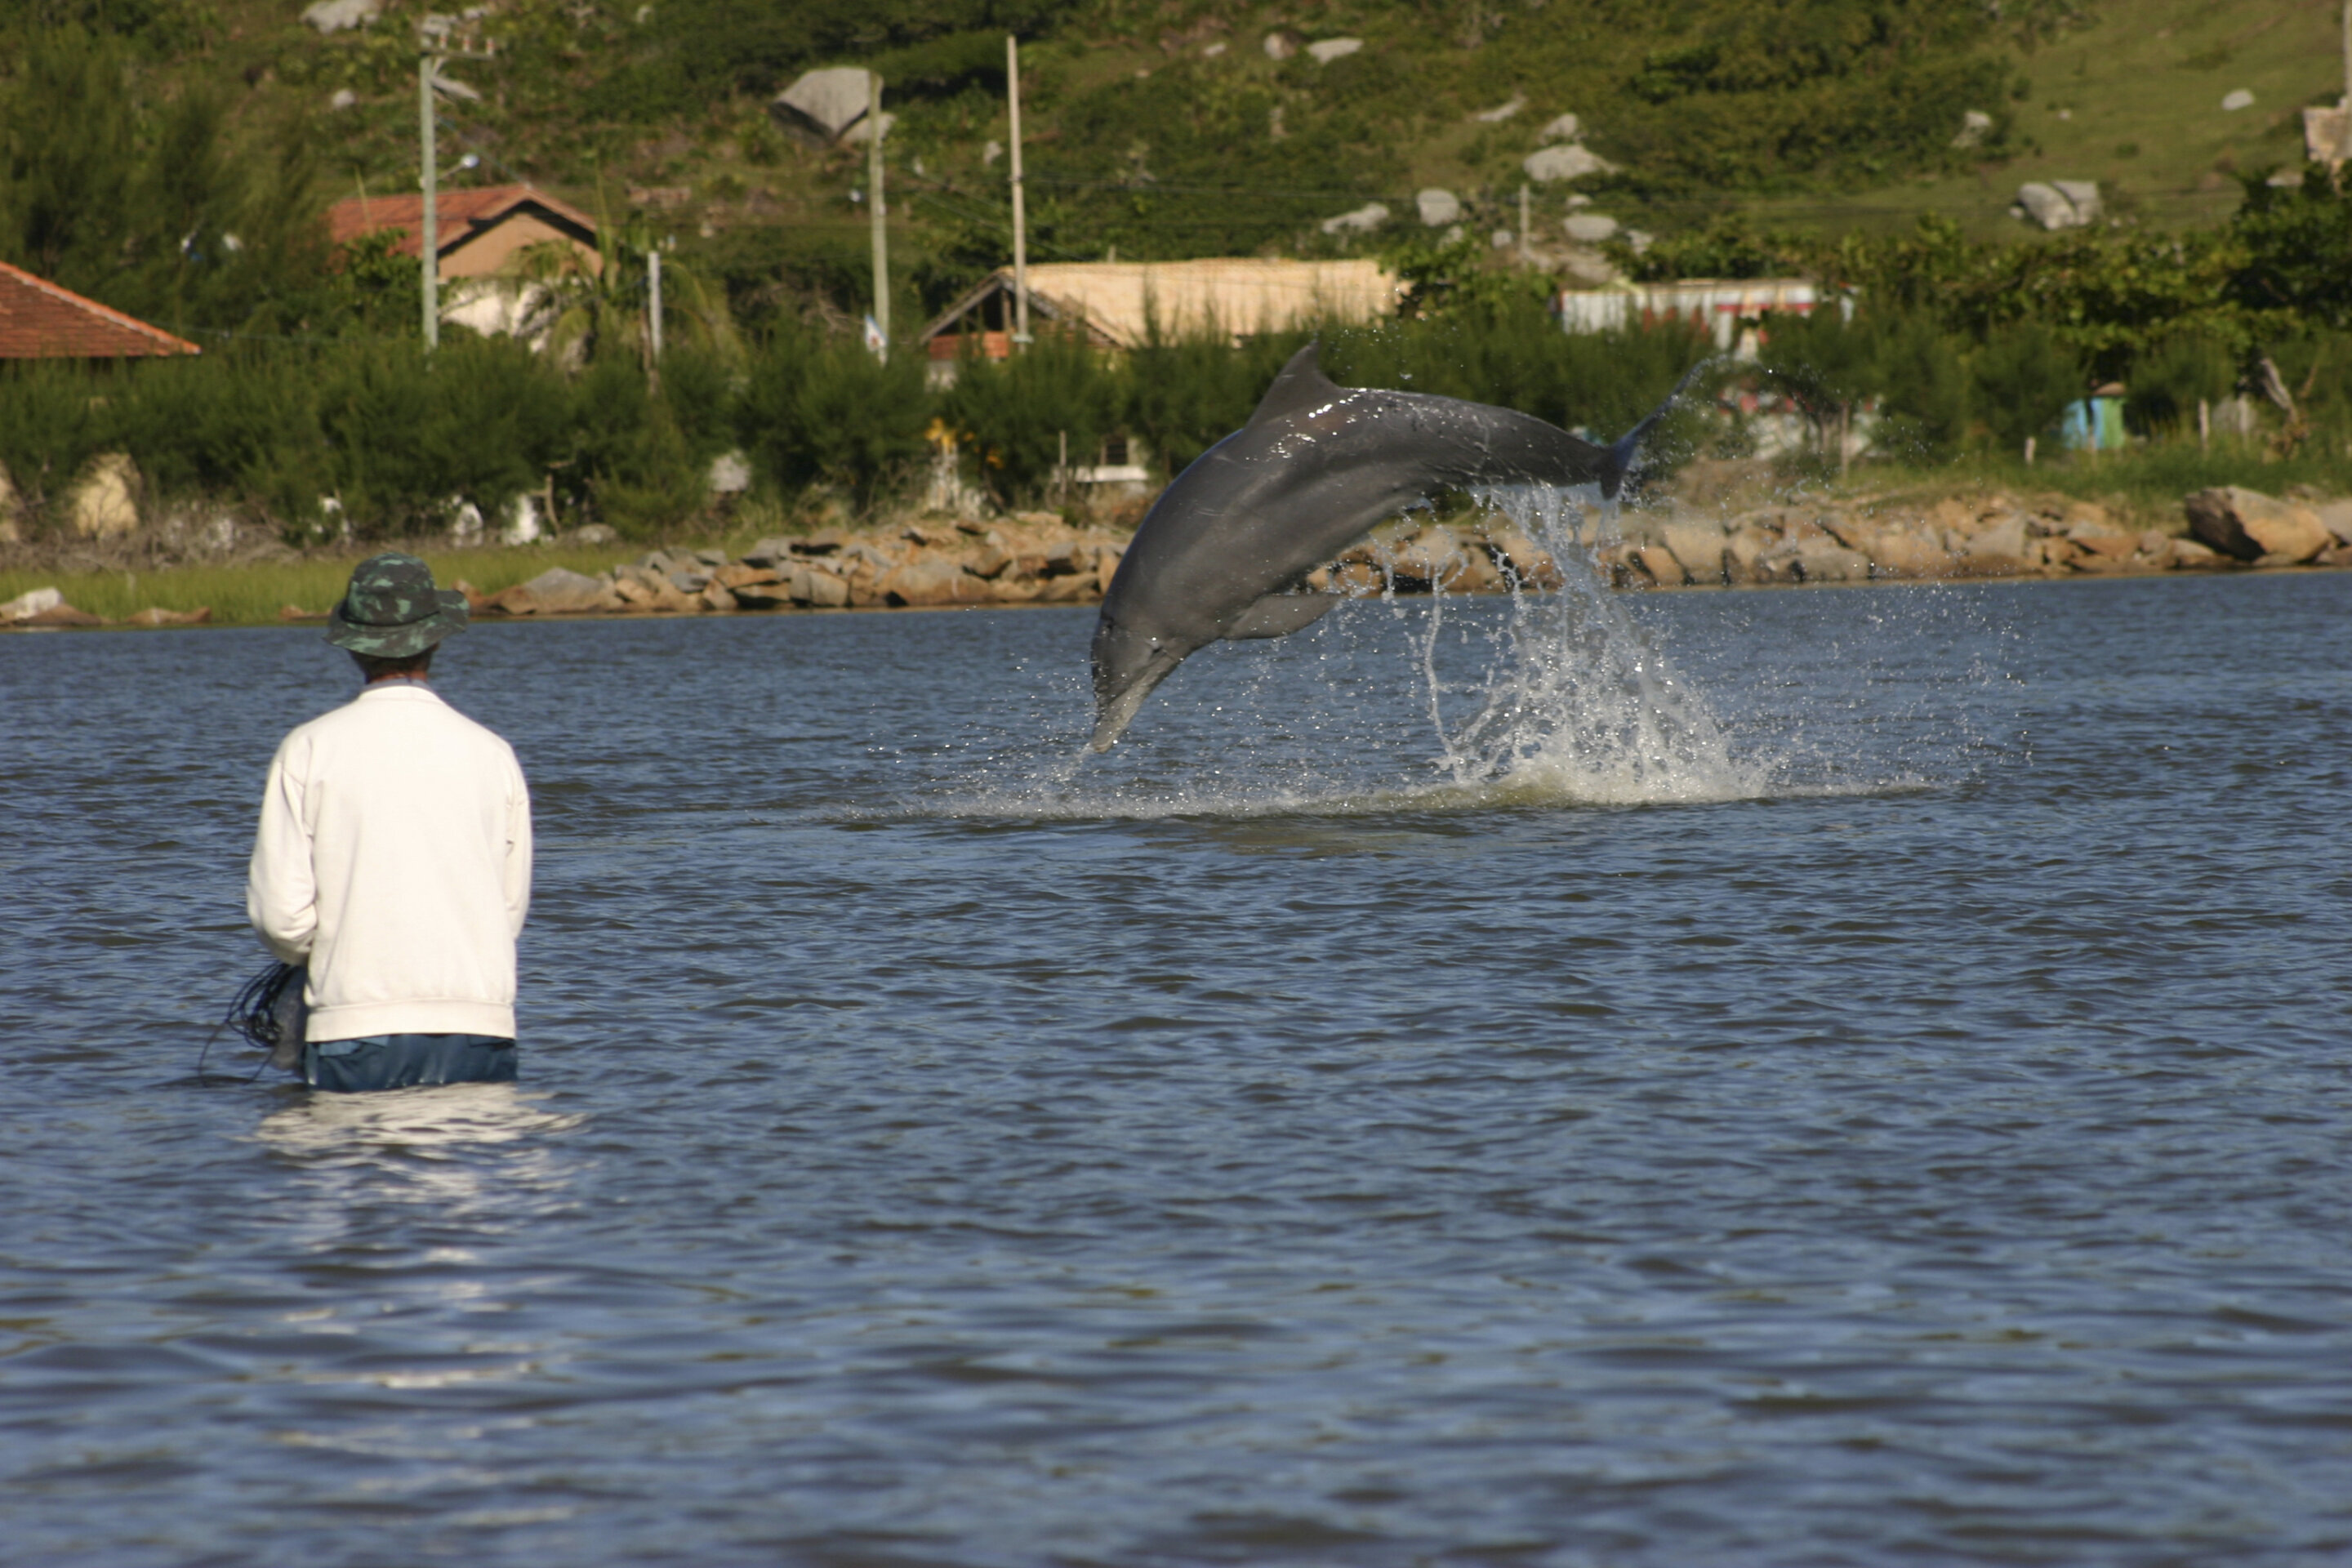 #Dolphins, humans both benefit from fishing collaboration